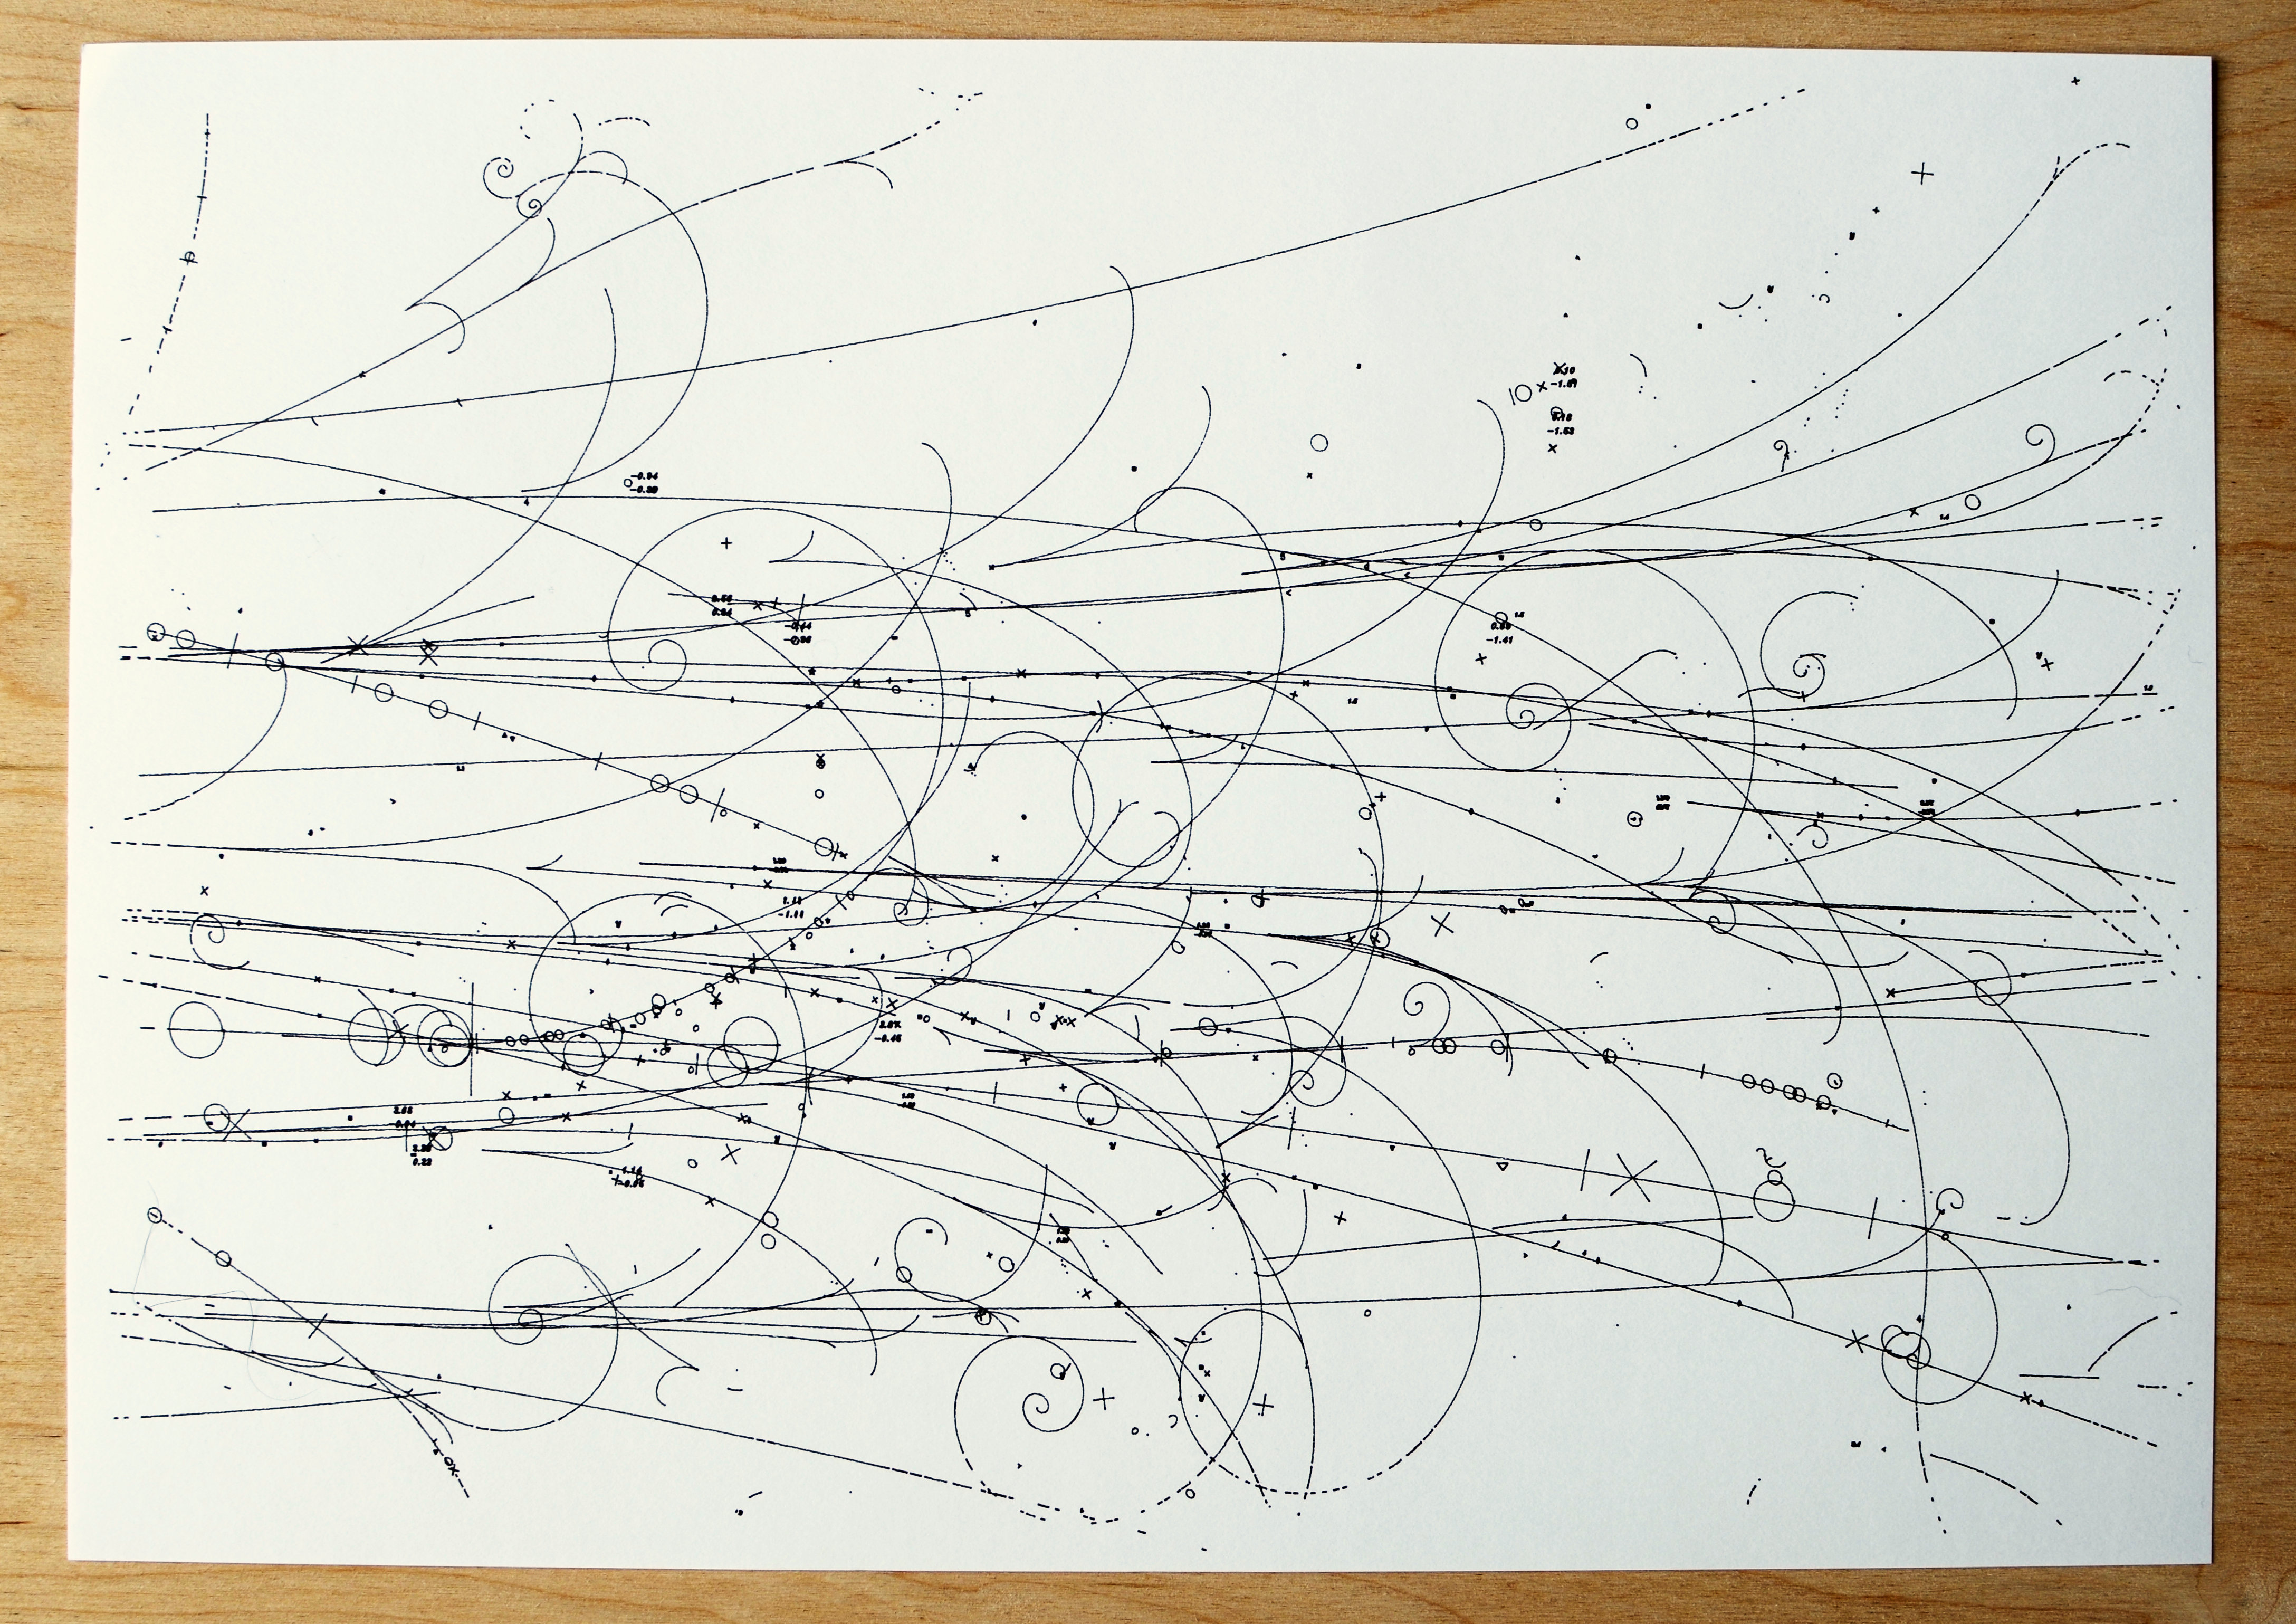 photograph of a plotted diagram, it has lines curving away from the right & symbols clustering along their length